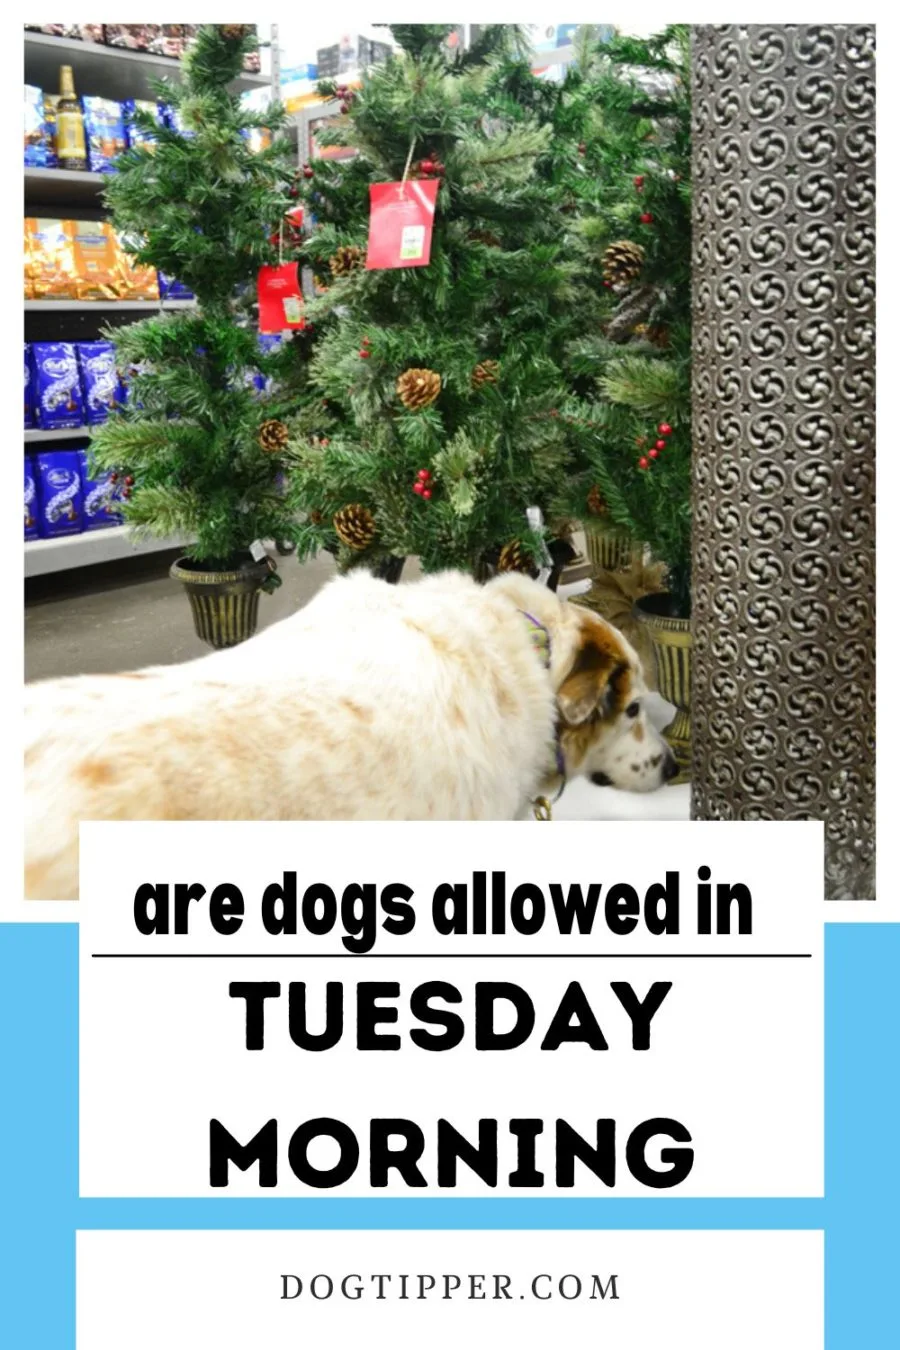 Are Dogs Allowed in Tuesday Morning stores?